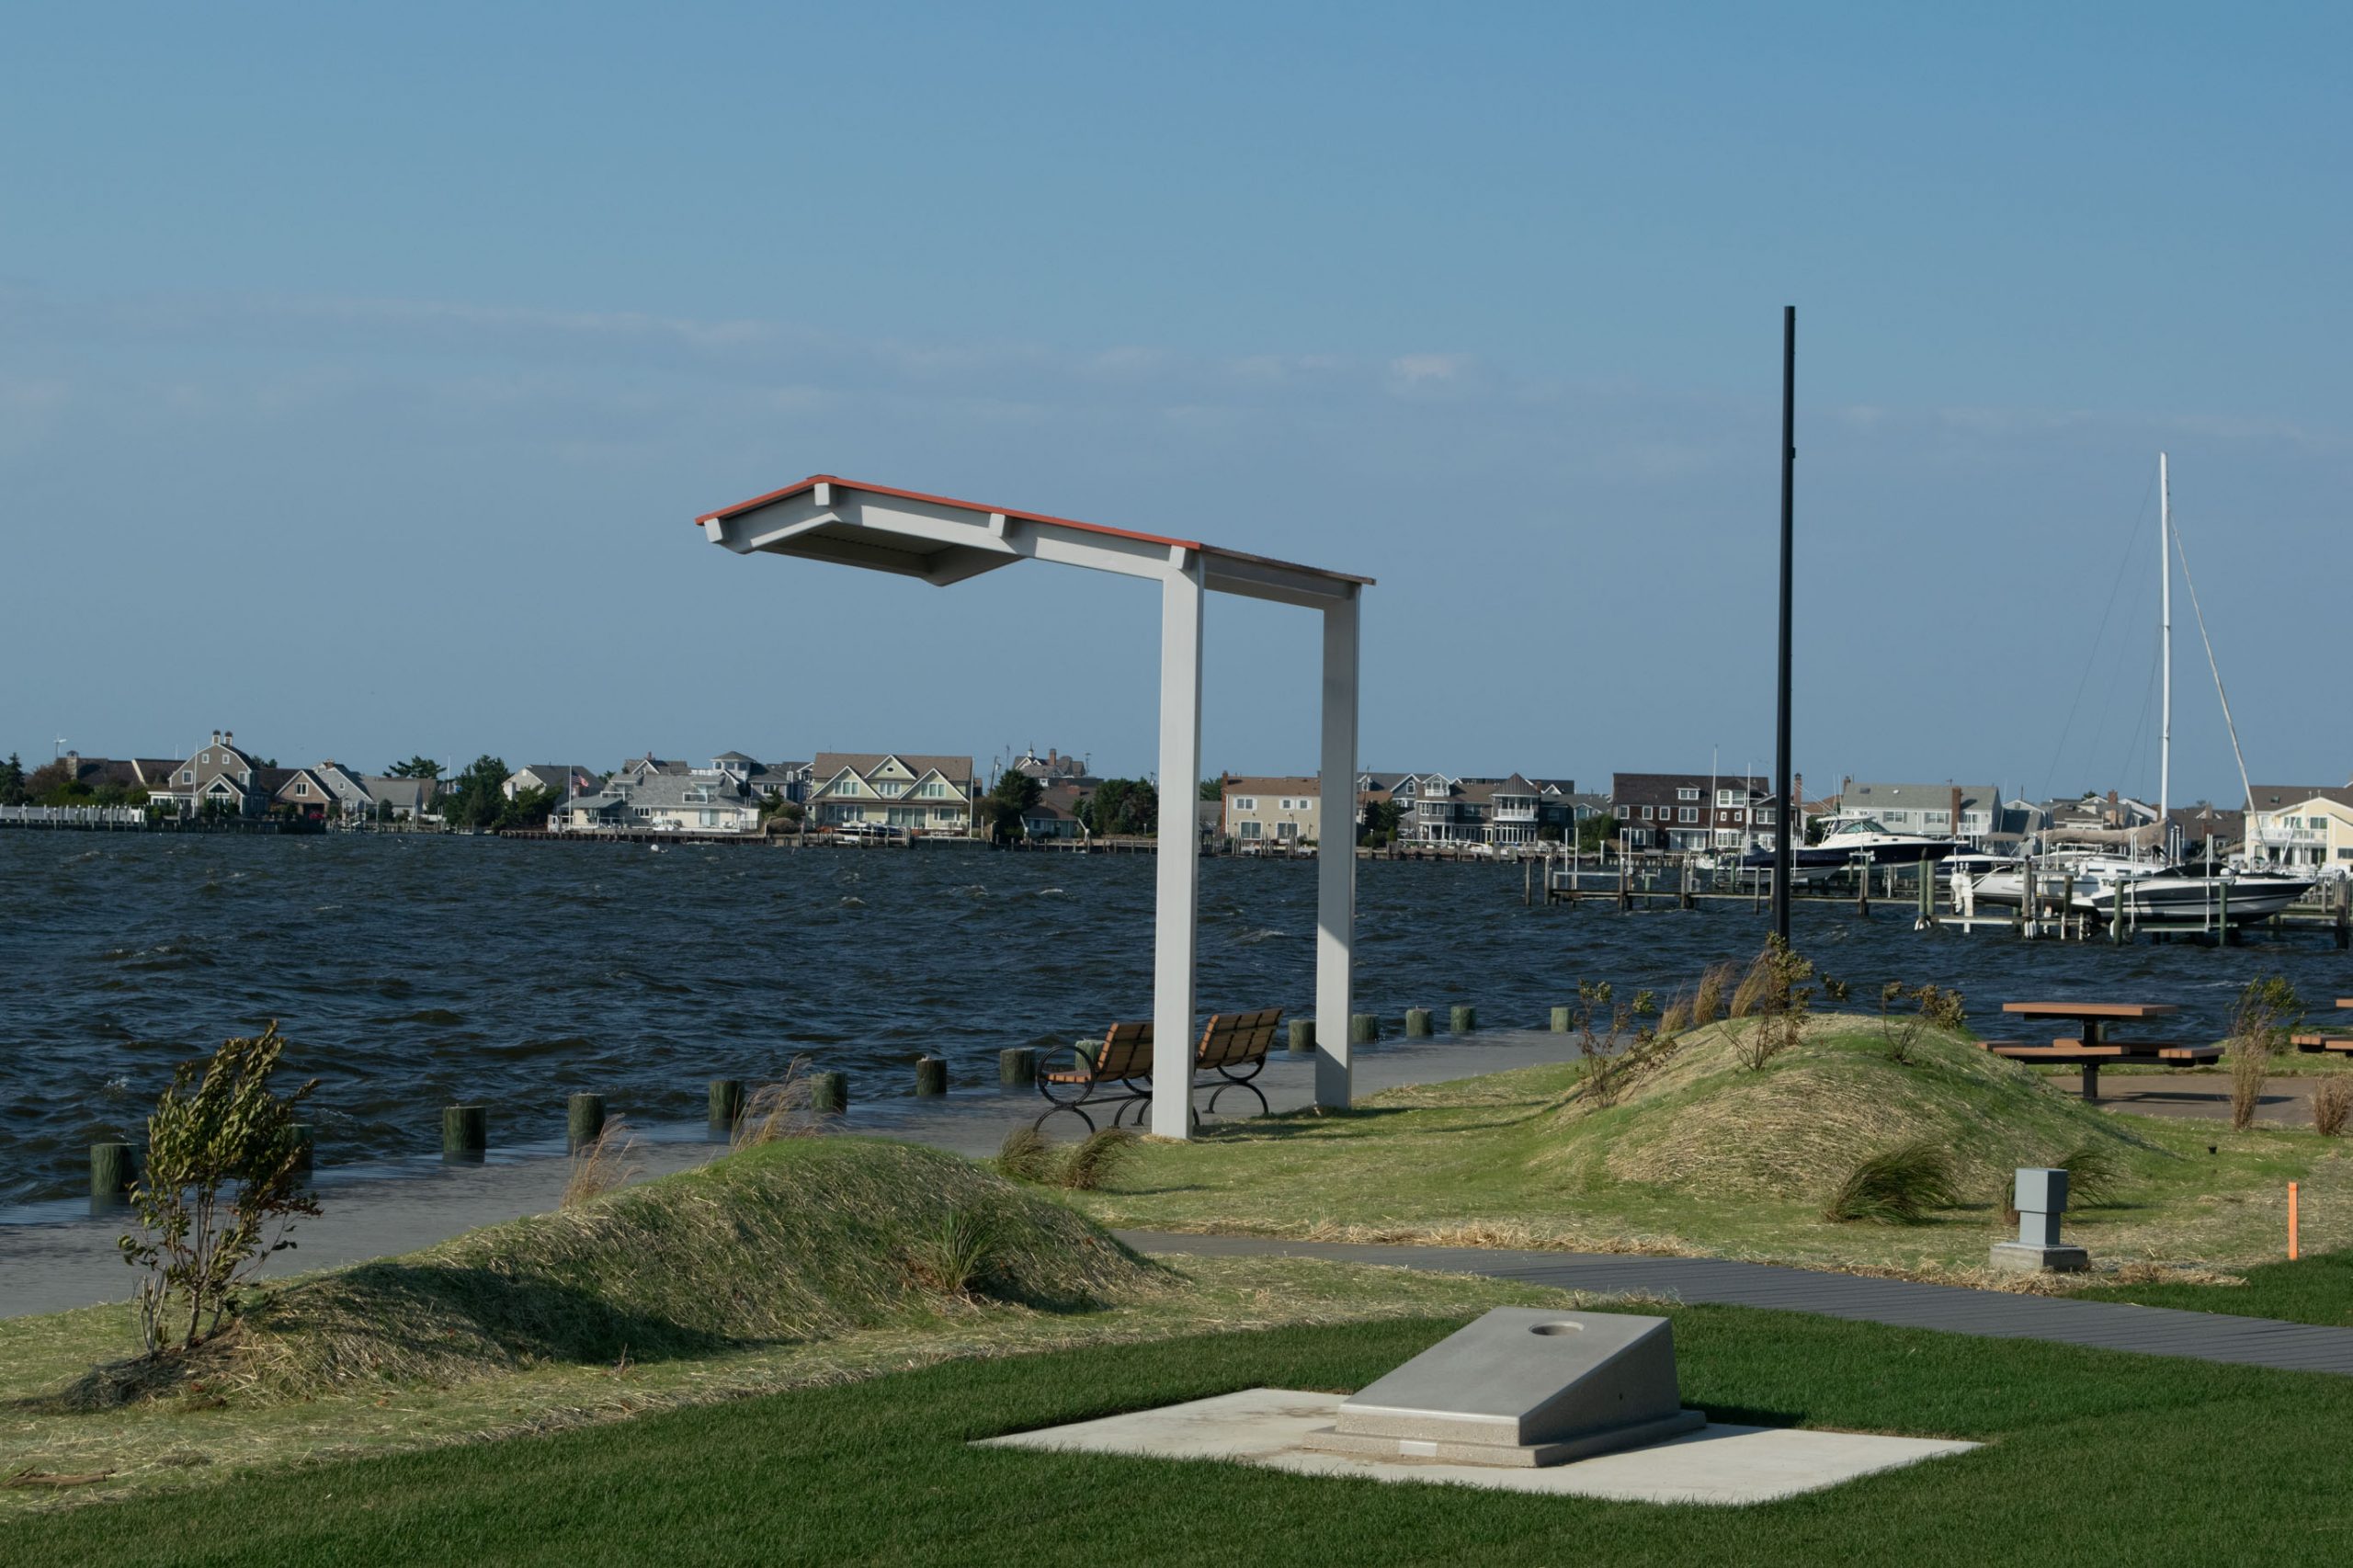 Bayside Park, a day after it reopened, Oct. 7, 2020. (Photo: Daniel Nee)